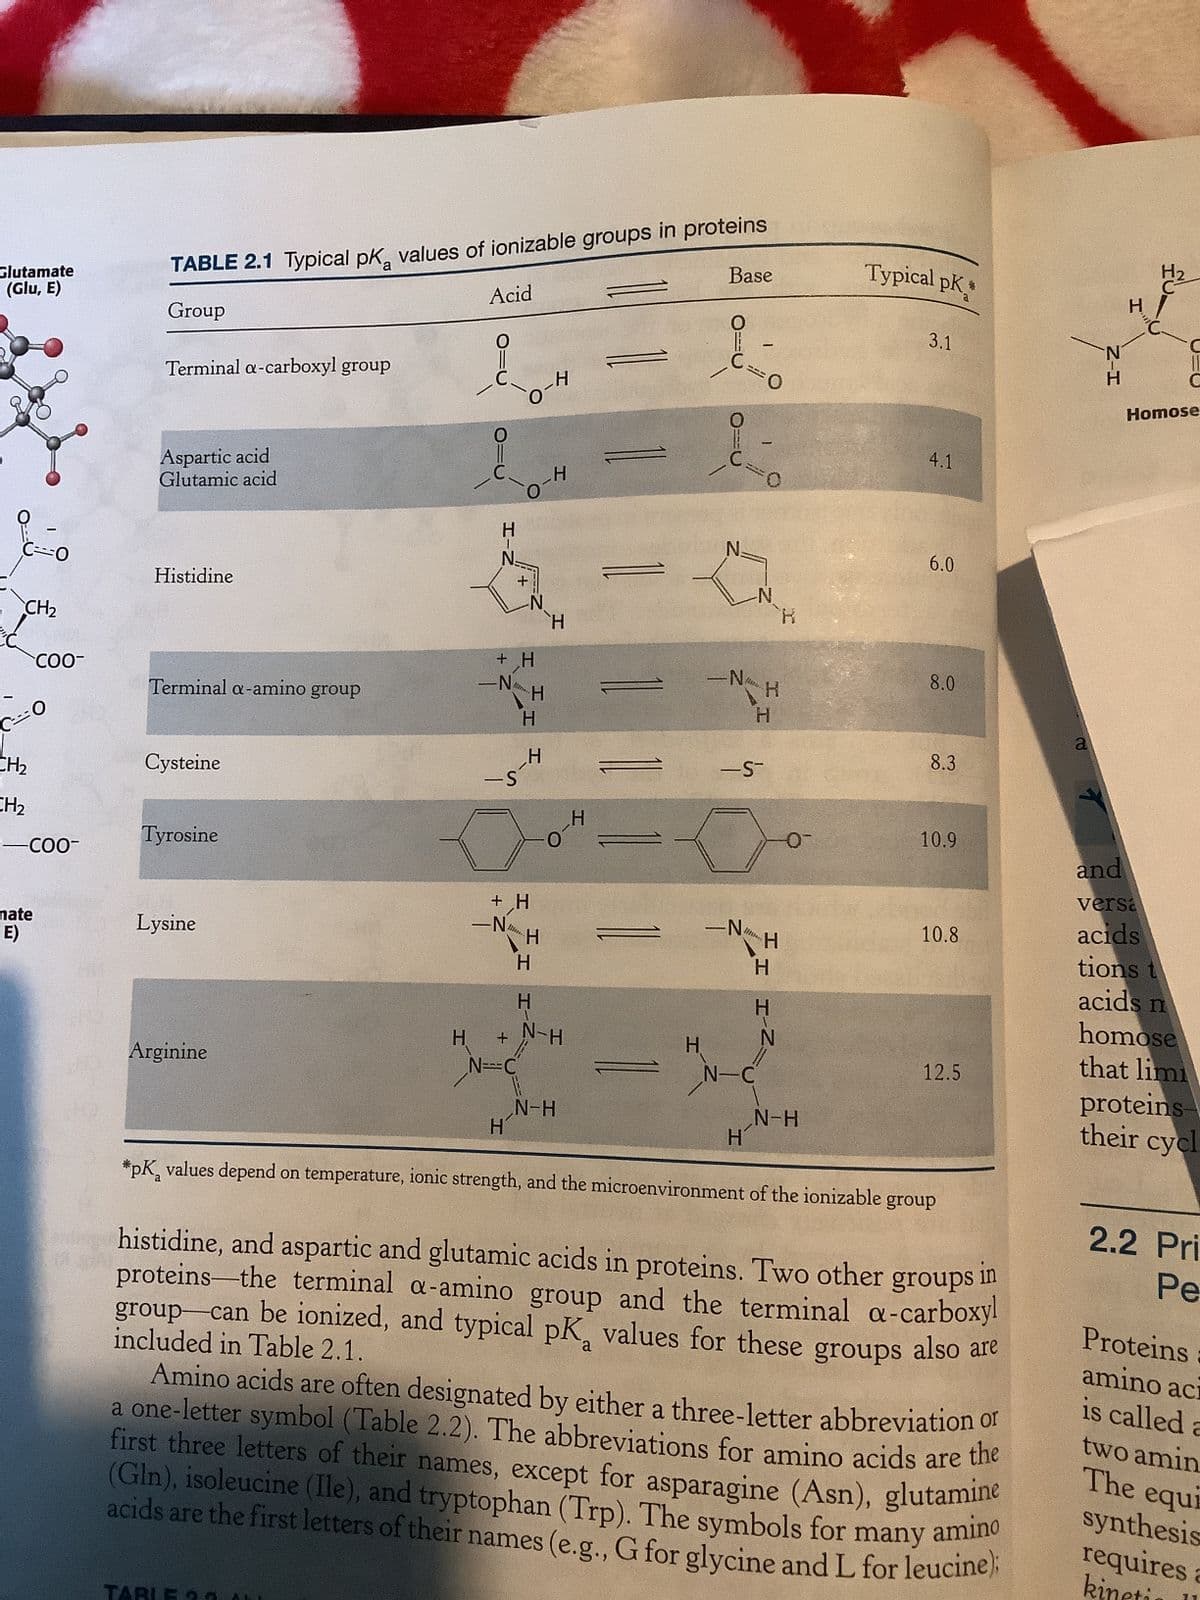 Glutamate
(Glu, E)
C÷0
CH₂
CO
CH₂
CH₂
COO-
-COO-
mate
E)
TABLE 2.1 Typical pK values of ionizable groups in proteins
Group
Terminal a-carboxyl group
Aspartic acid
Glutamic acid
Histidine
Terminal a-amino group
Cysteine
Tyrosine
Lysine
Arginine
H
Acid
0
-N
+ H
-S
-N
+
+
-N
N=C
H
+ H
...
H
H
H
H
H
-Н
H
H
H
H
O
N-H
1
N-H
H
H
Base
2
N₂
-N
-N
Bil
H
1
-
-N
FO
-S-
H
H
N-C
H
H
H
N
H
-0-
N-H
Typical pK
*pK values depend on temperature, ionic strength, and the microenvironment of the ionizable
3.1
4.1
6.0
8.0
8.3
10.9
10.8
12.5
group
histidine, and aspartic and glutamic acids in proteins. Two other groups in
proteins—the terminal a-amino group and the terminal a-carboxyl
group—can be ionized, and typical pK values for these groups also are
included in Table 2.1.
Amino acids are often designated by either a three-letter abbreviation of
a one-letter symbol (Table 2.2). The abbreviations for amino acids are the
first three letters of their names, except for asparagine (Asn), glutamine
(Gln), isoleucine (Ile), and tryptophan (Trp). The symbols for
acids are the first letters of their names (e.g., G for glycine and L for leucine);
many amino
a
Z-H
H
Homose
and
versa
acids
tions t
acids n
homose
that limi
proteins
their cycl
2.2 Pri
Pe
Proteins a
amino ac
is called a
two amin
The equi
synthesis
requires a
kineti